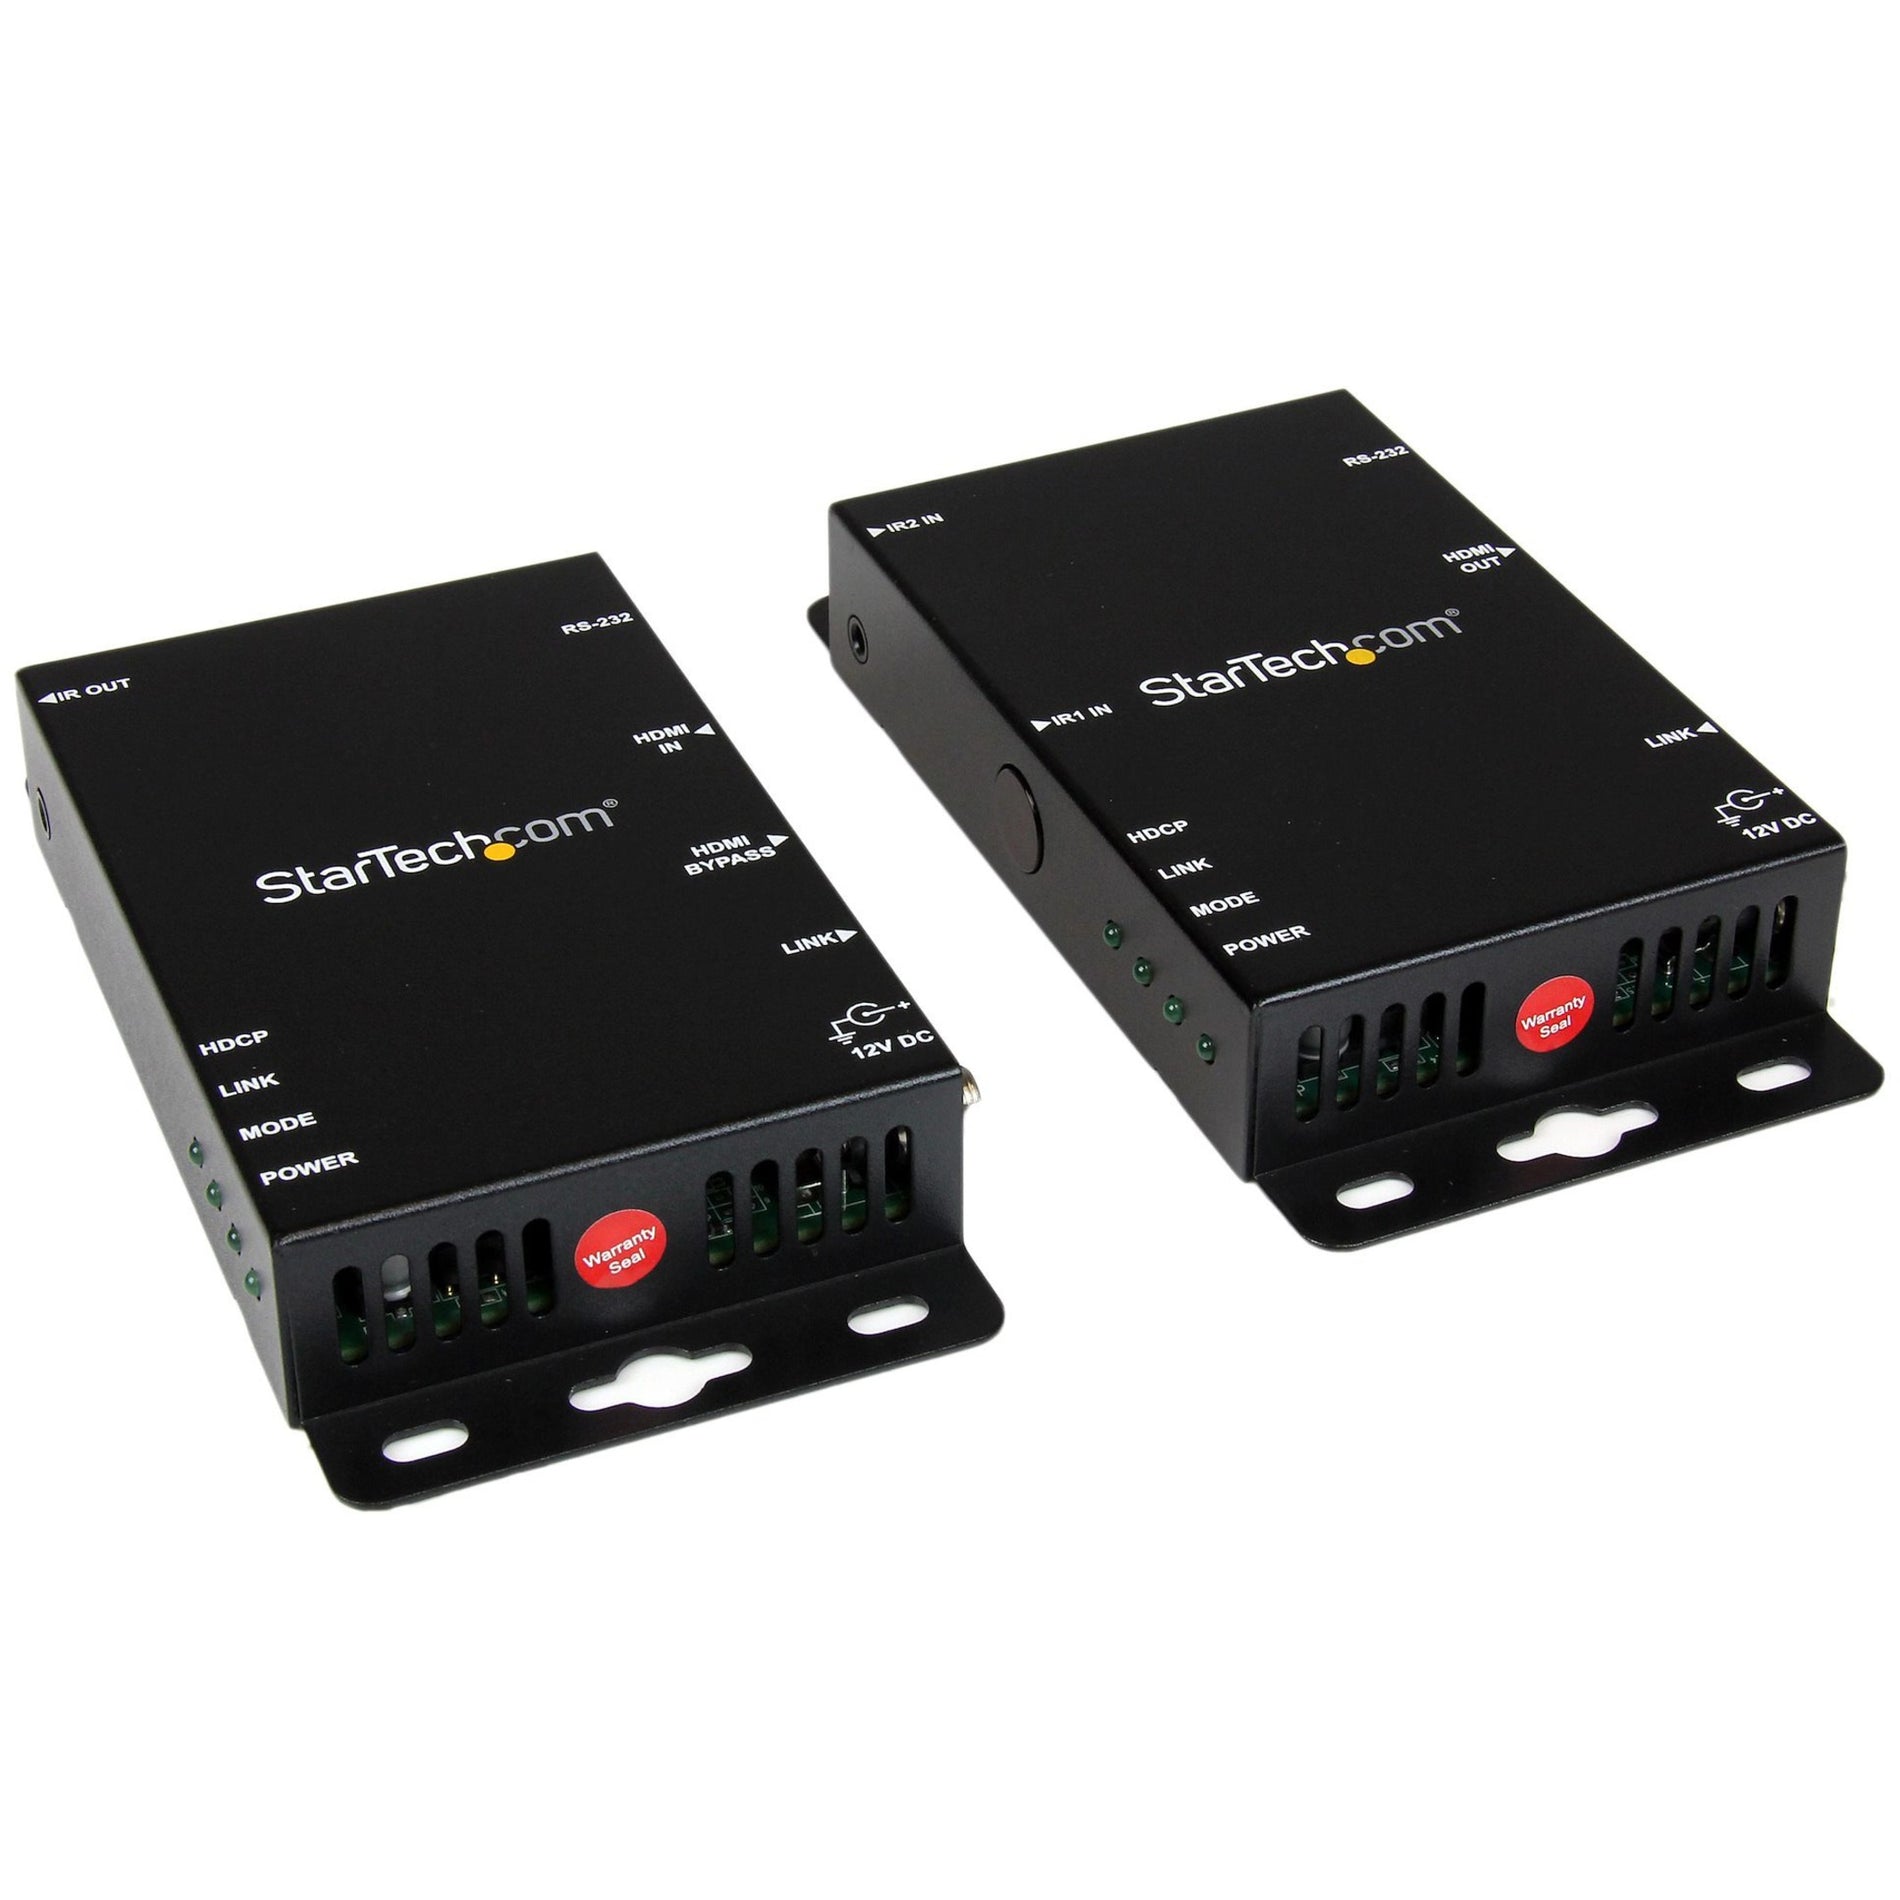 StarTech.com ST121UTPHD2 HDMI over Cat5 Video Extender with Audio - Extend 4K HDMI Signals up to 328ft